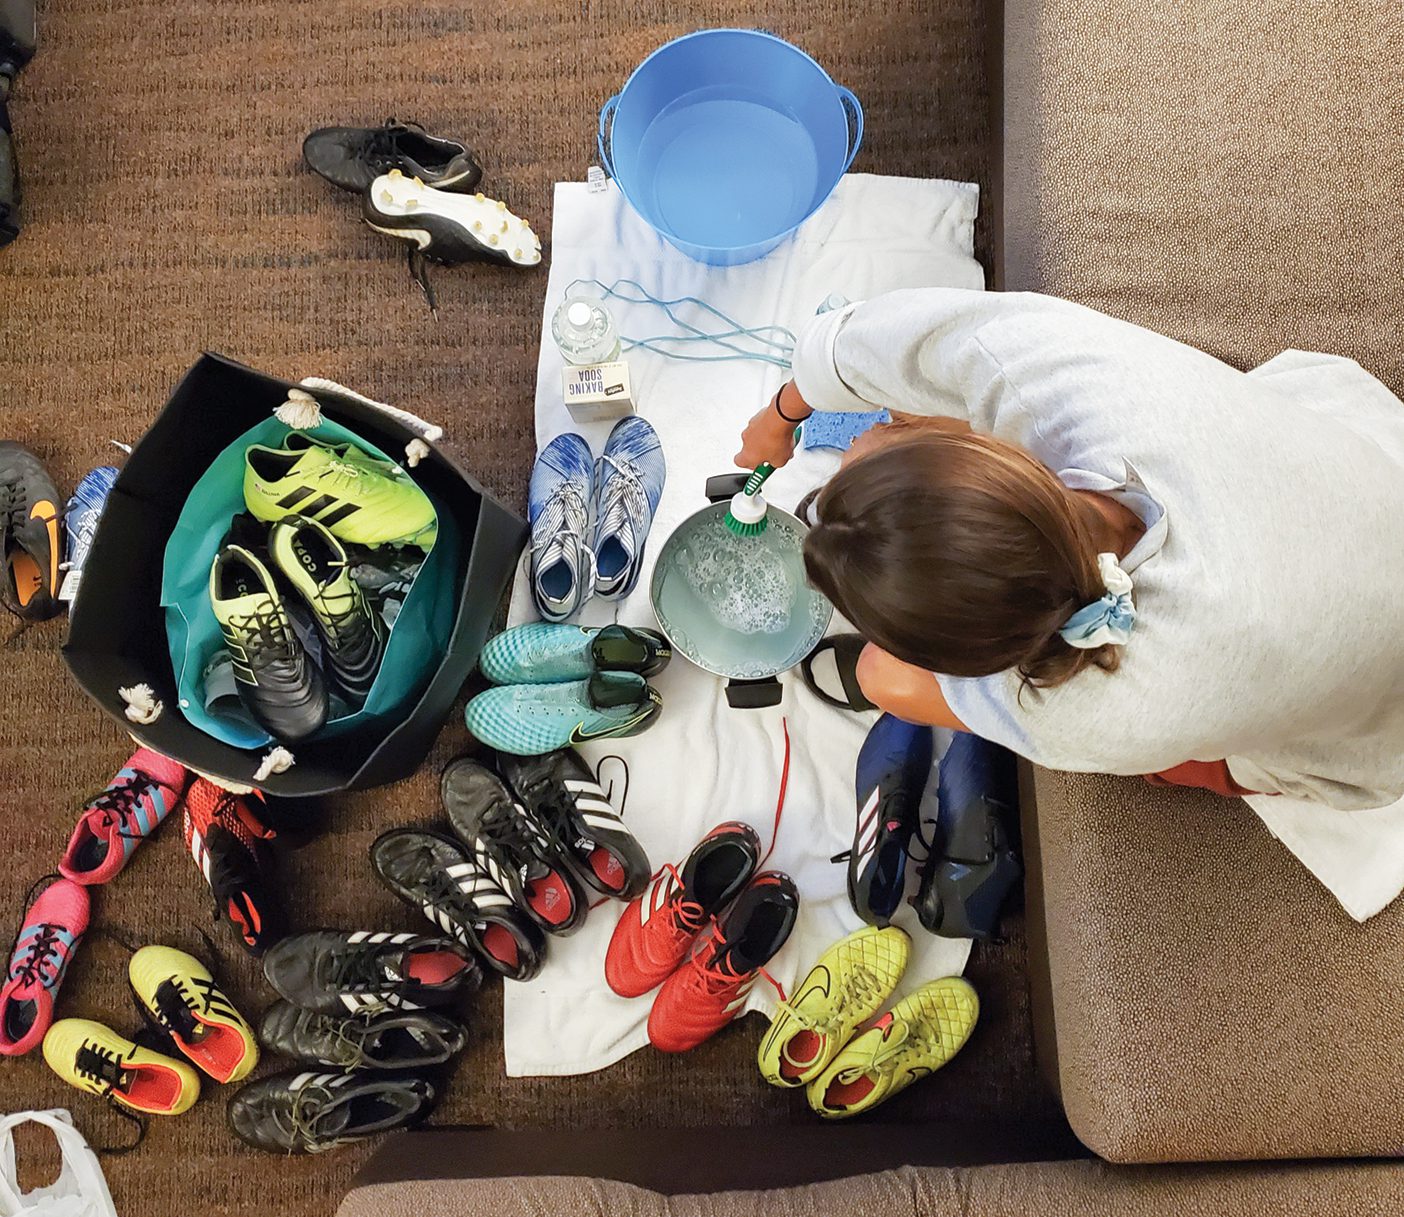 A woman cleans a bunch of brightly colored cleats.